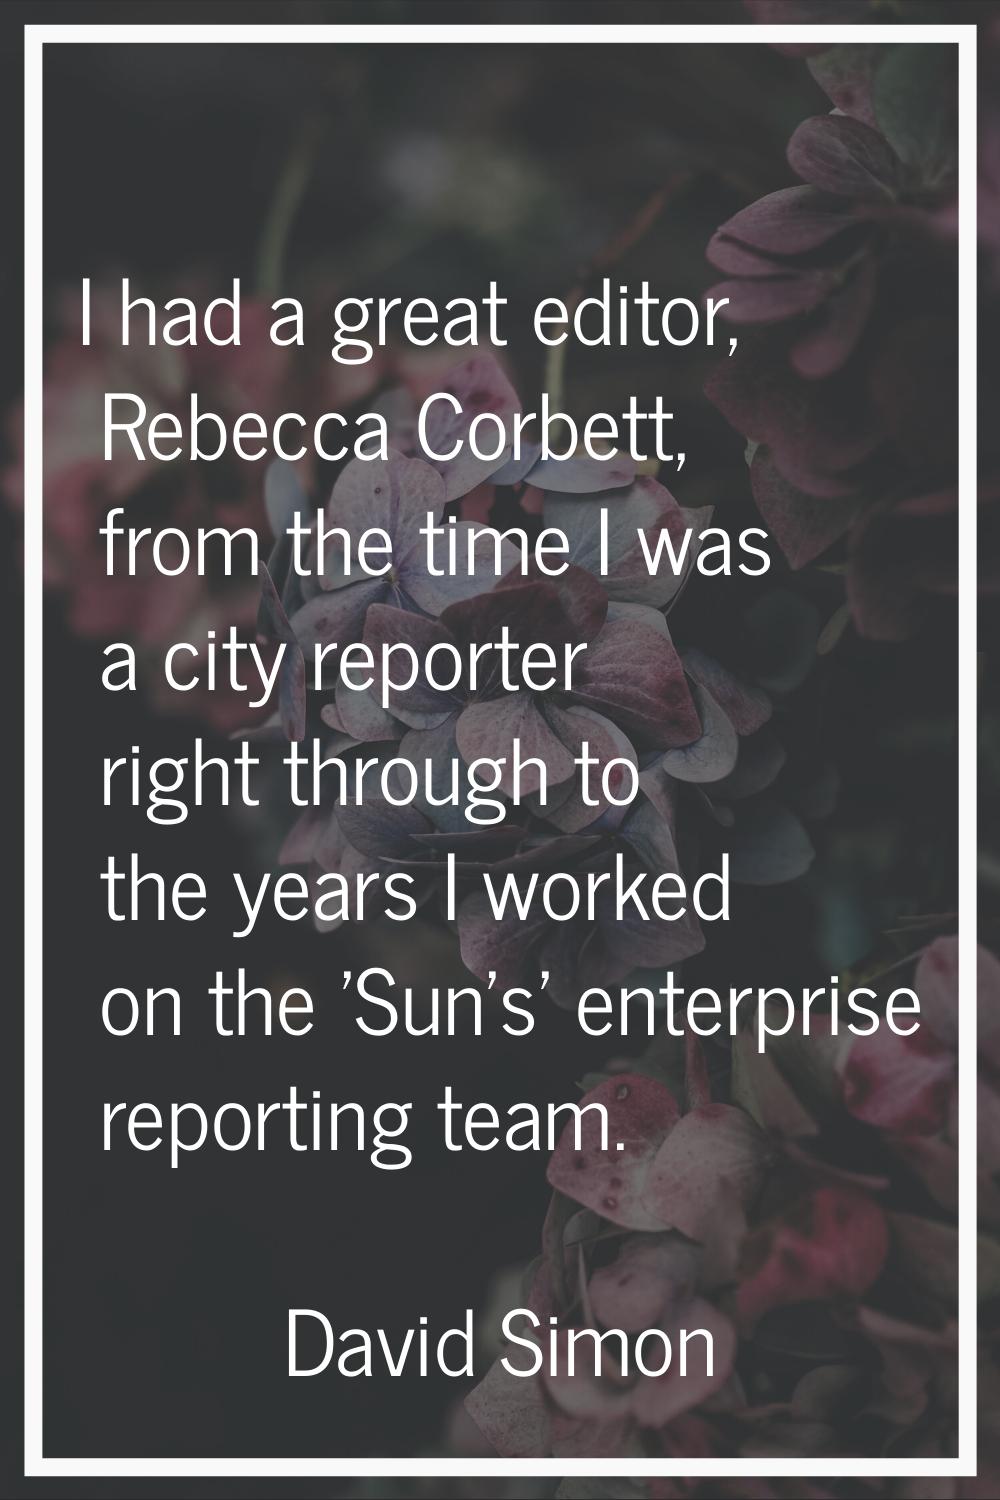 I had a great editor, Rebecca Corbett, from the time I was a city reporter right through to the yea